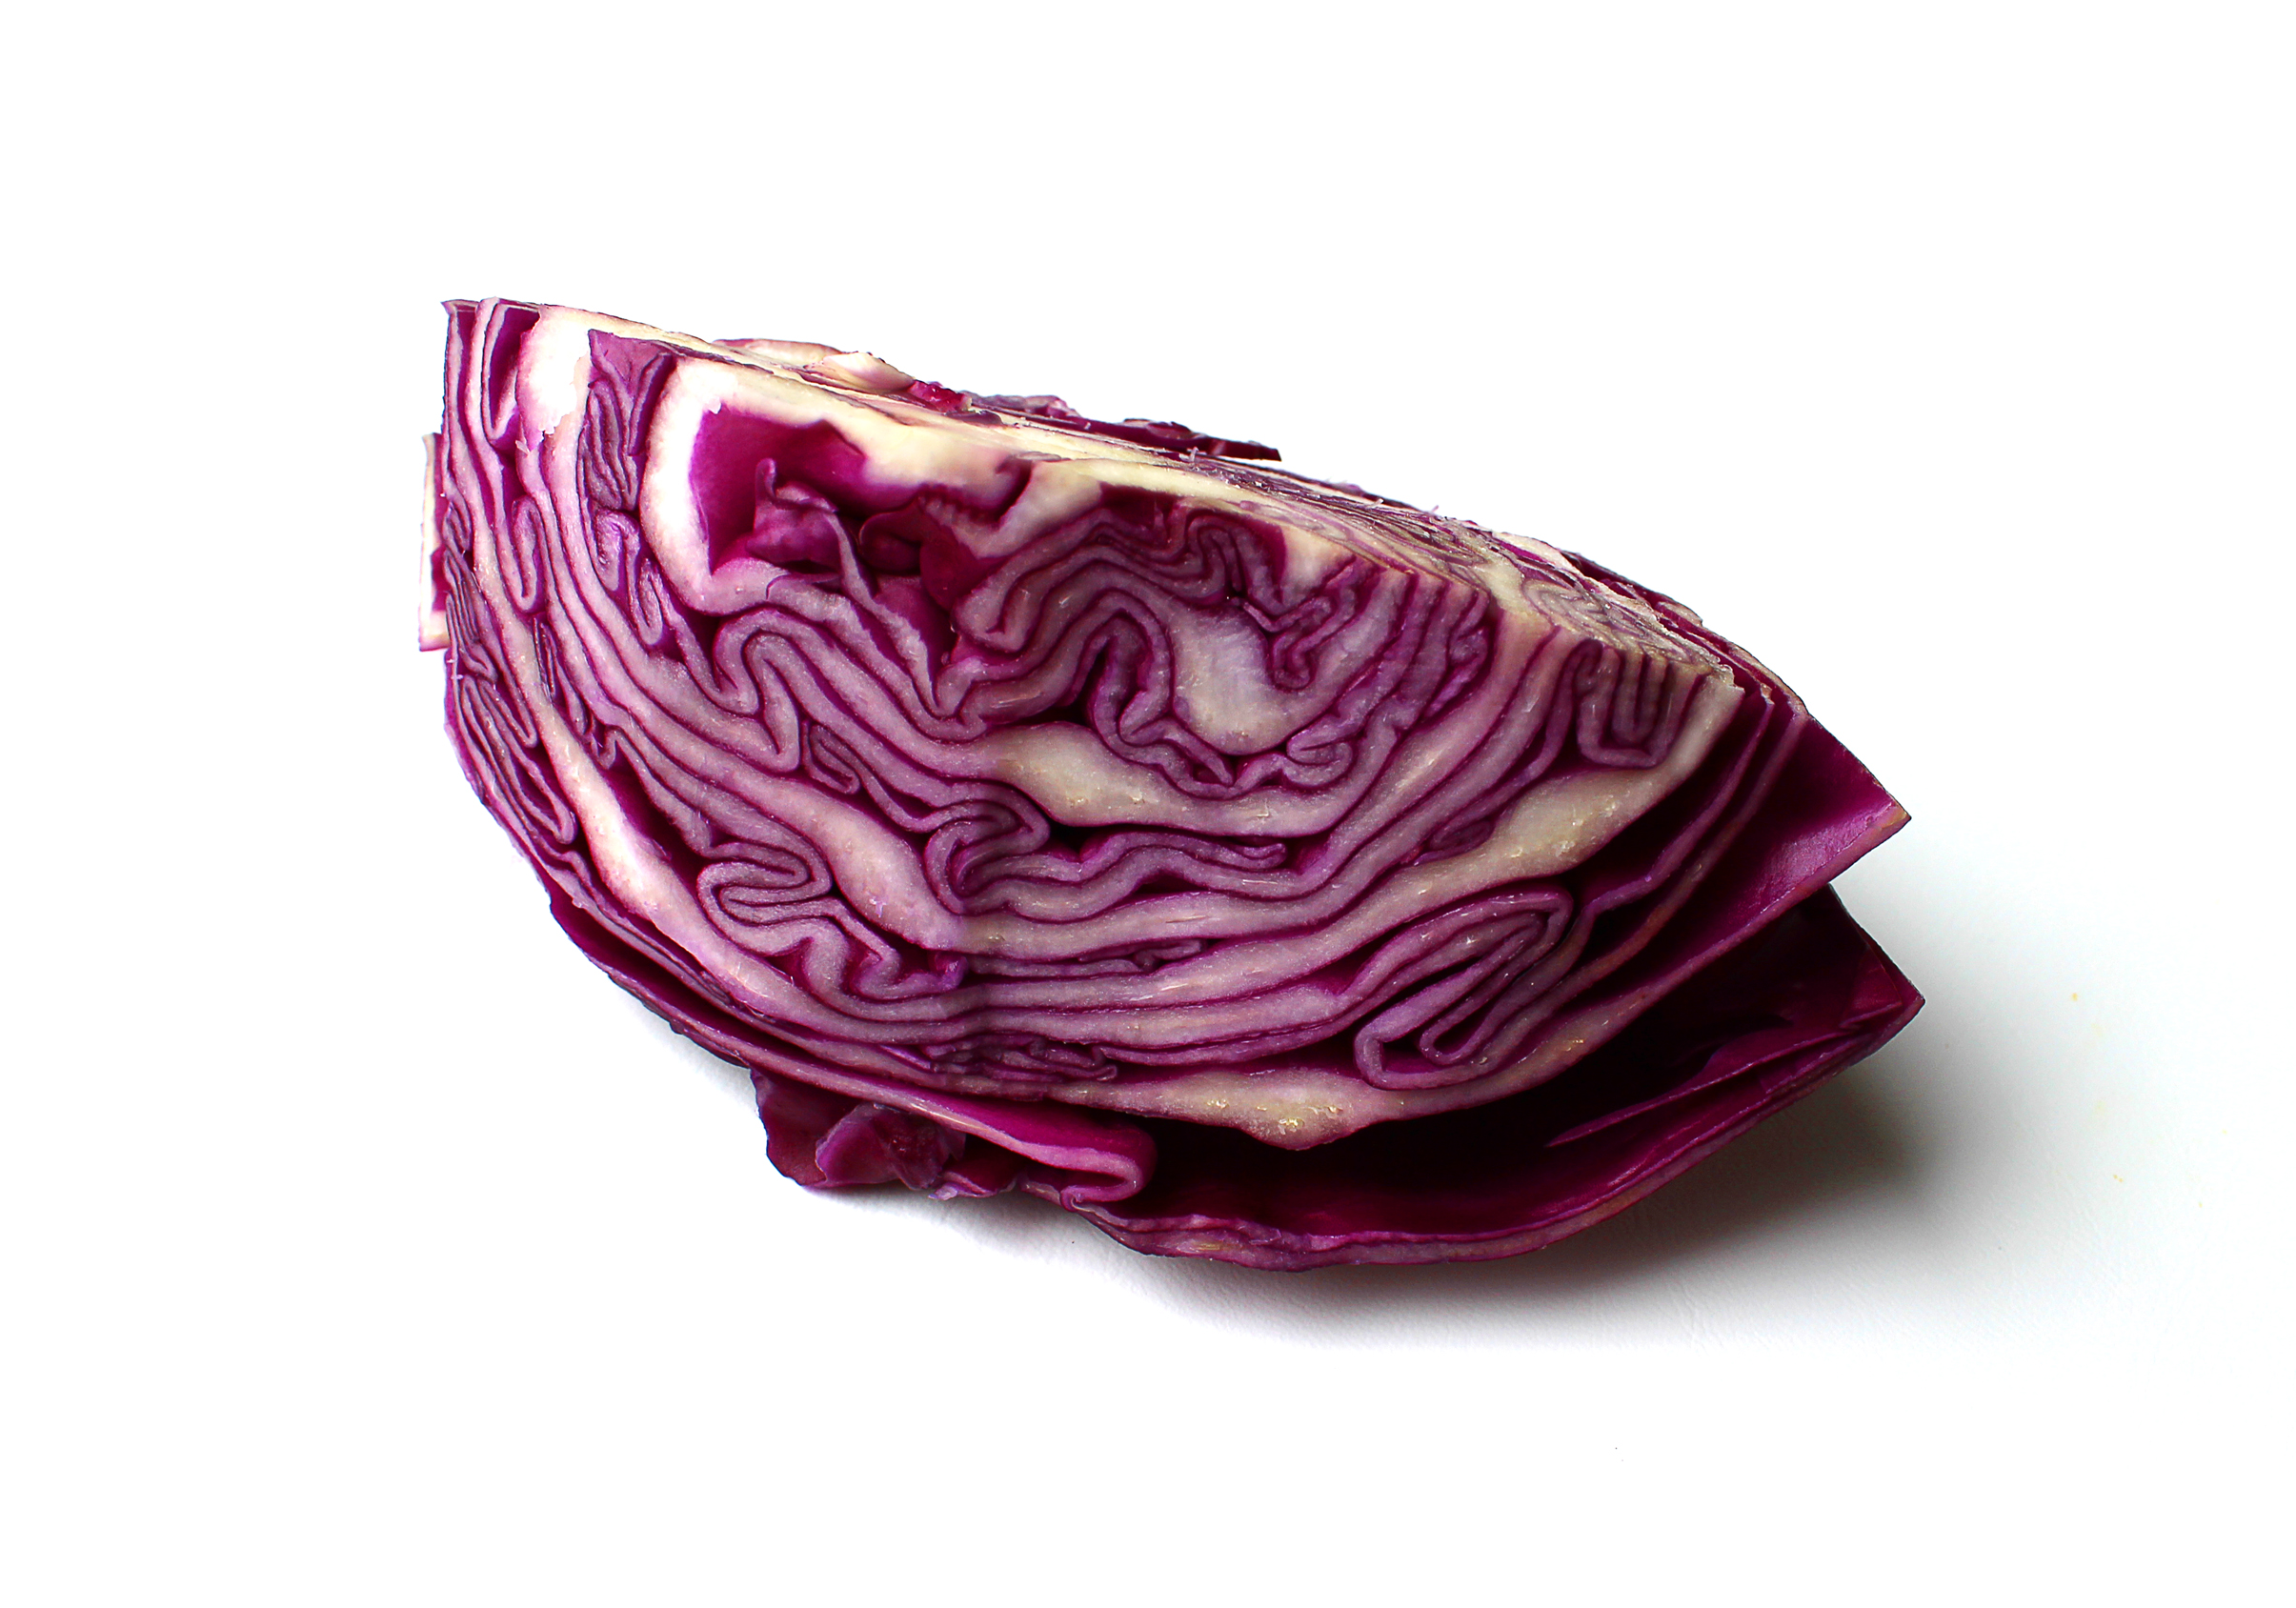 A slice of red cabbage on white photo